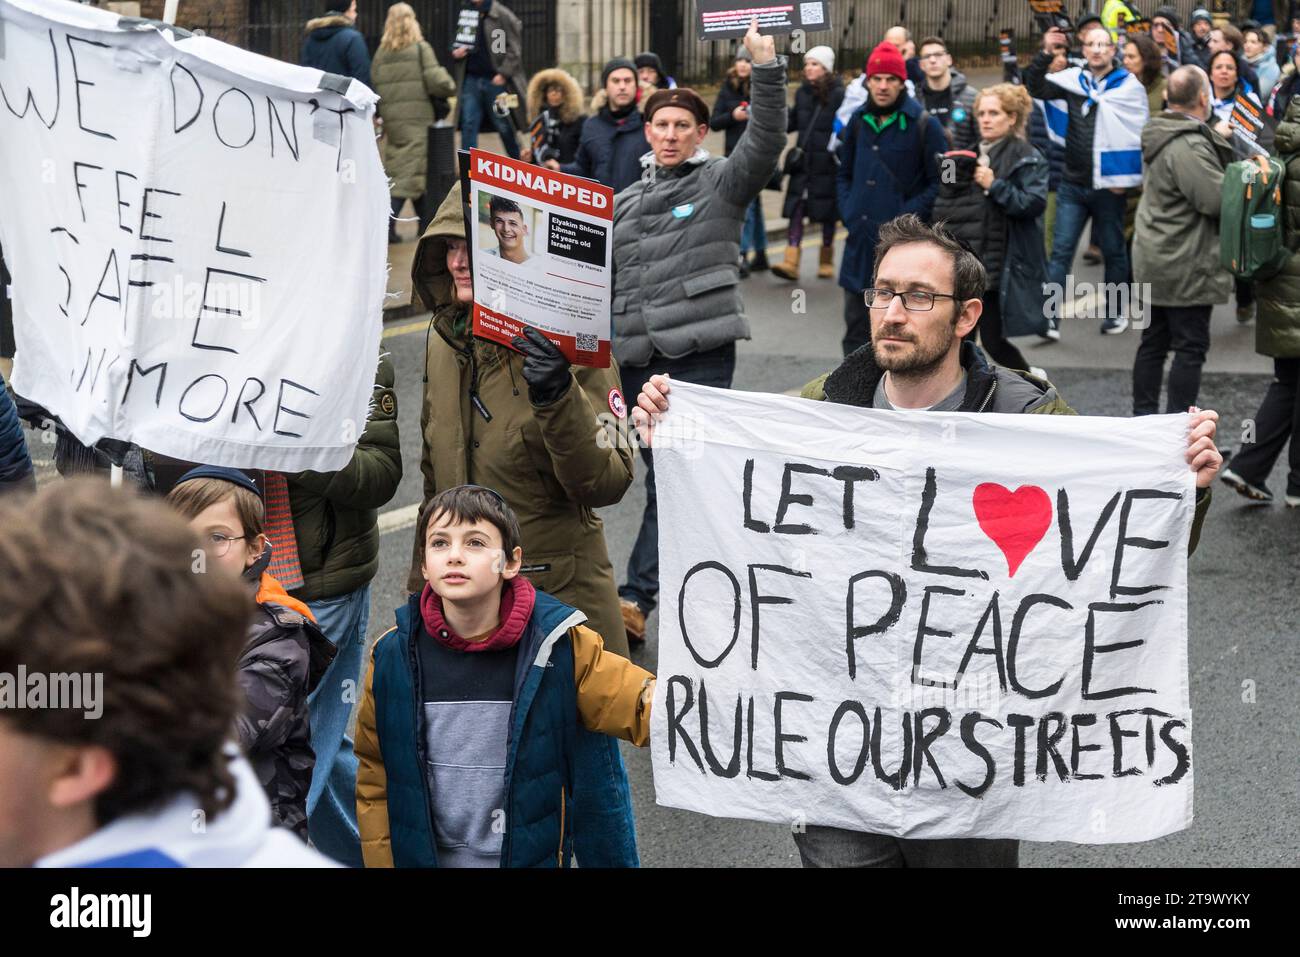 Let Love of Peace Rule Our Street, March against antisemitism, tens of thousands people protest against a rise in hate crimes against Jews, London, UK Stock Photo